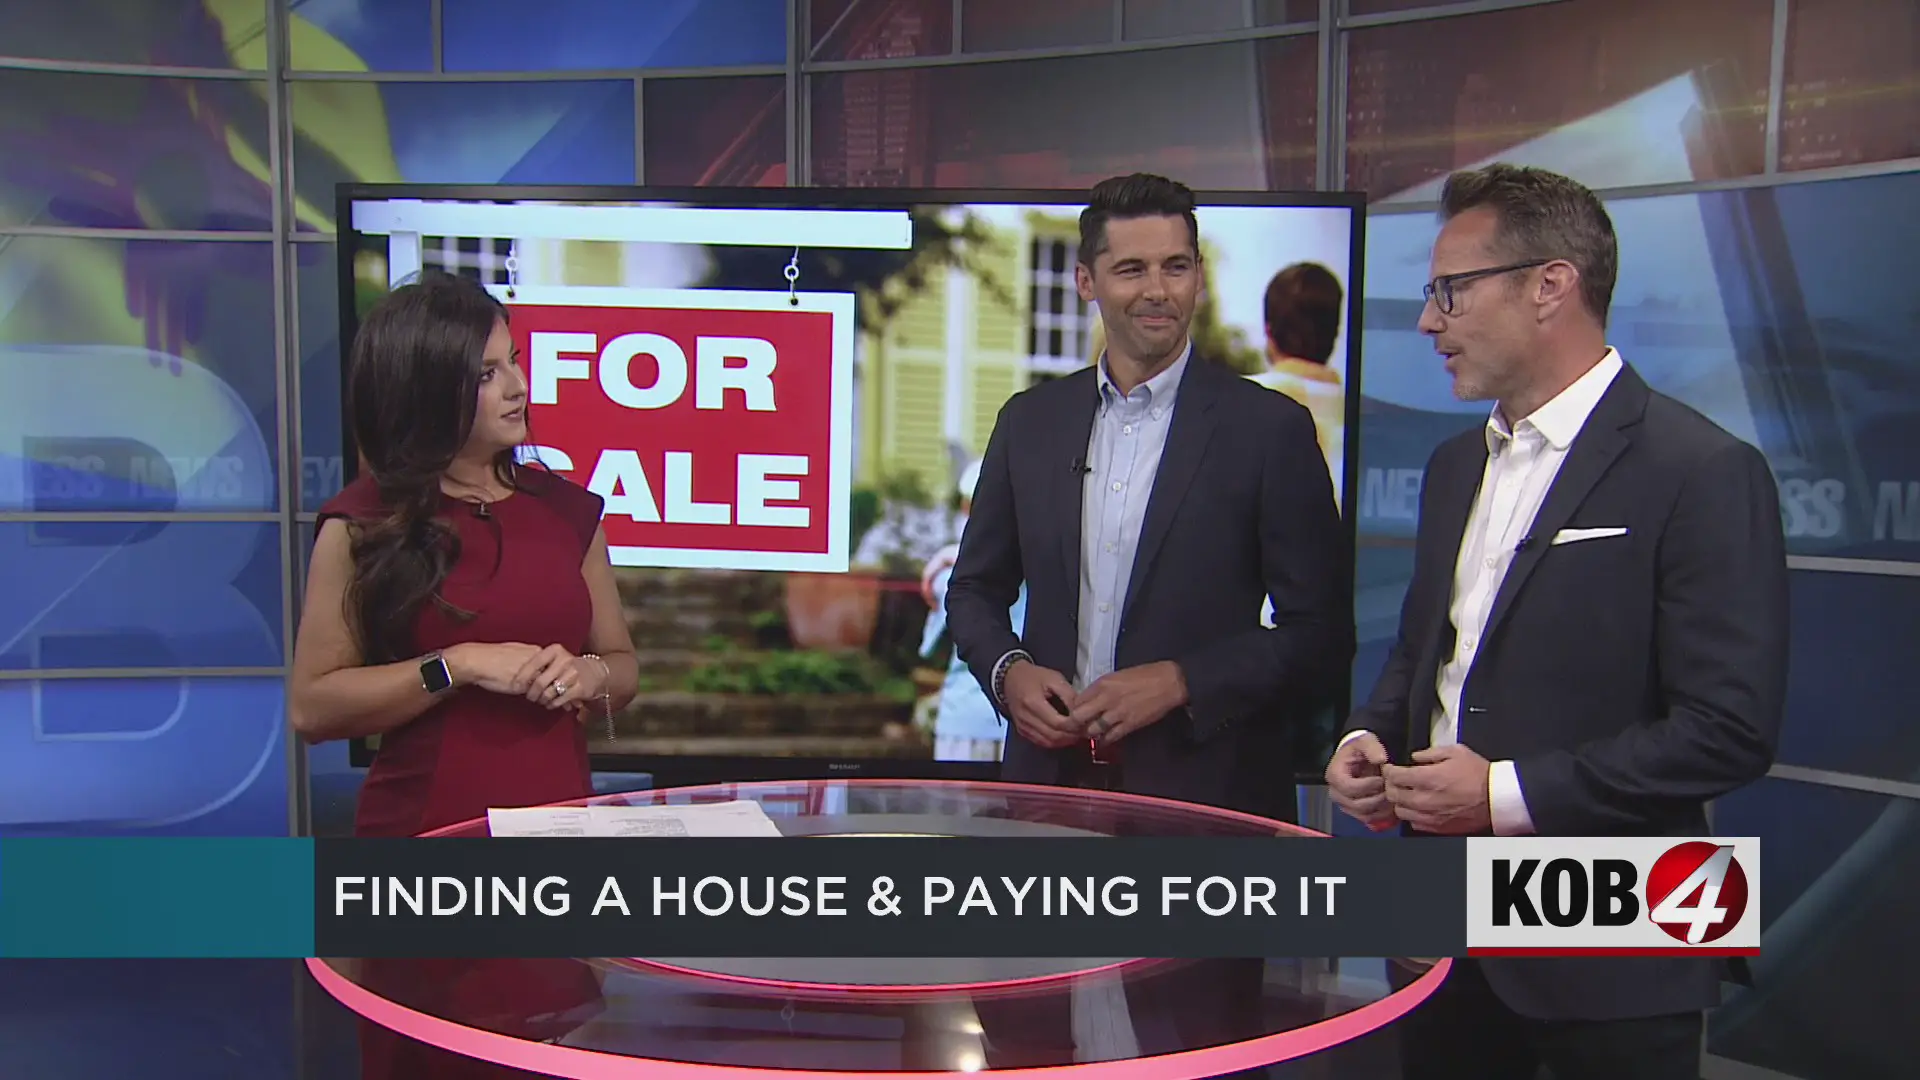 Local financial advisor, realtor offer home-buying tips